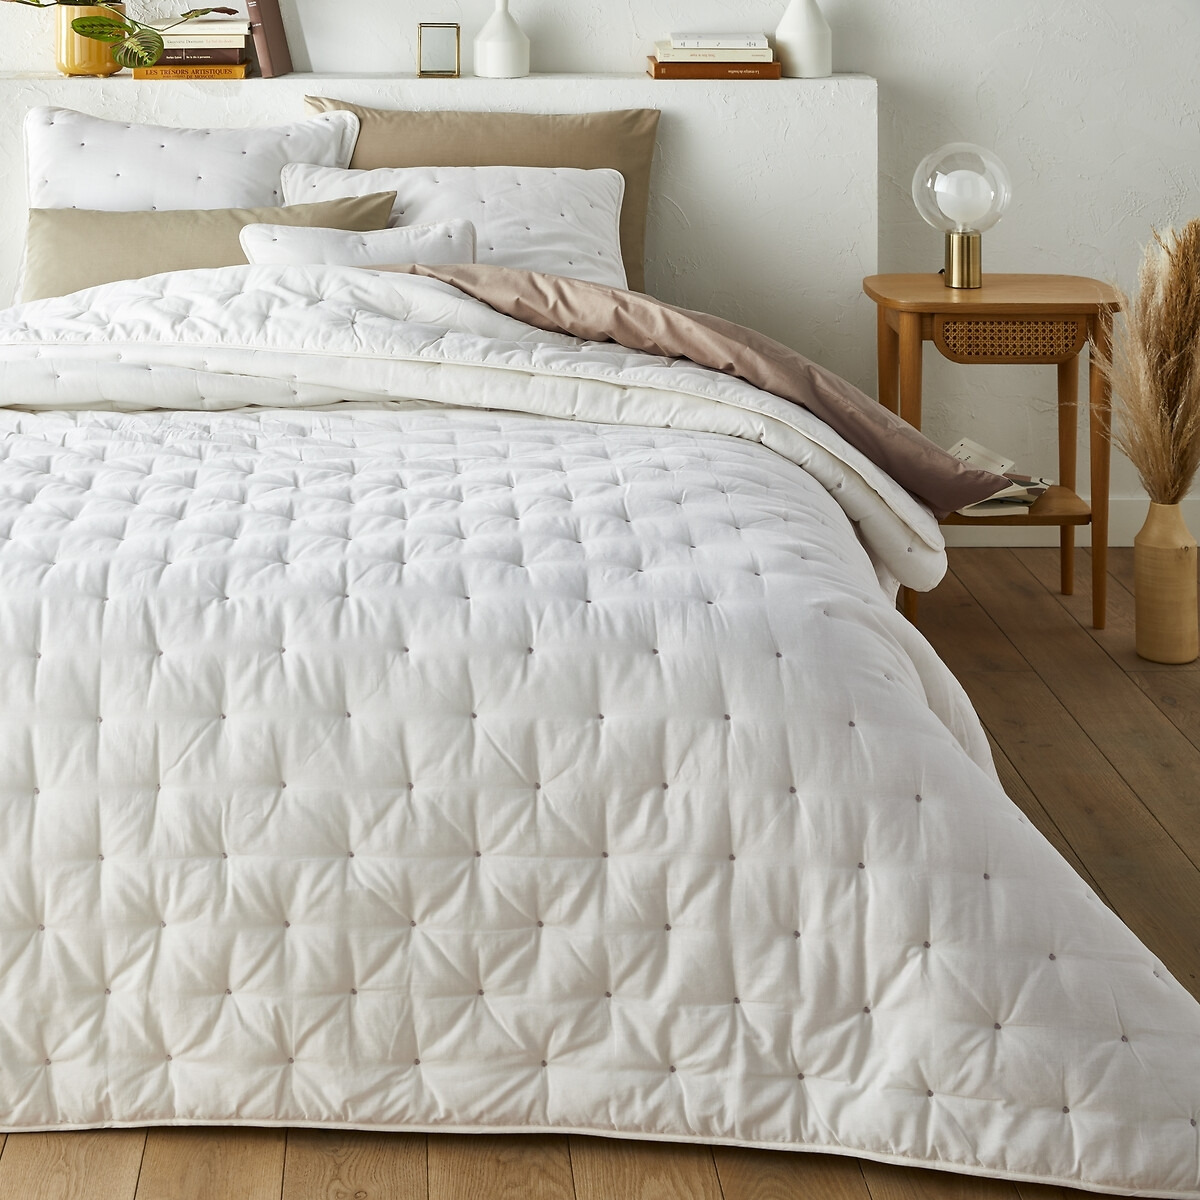 Aéri Embroidered Quilted 100% Cotton Bedspread - image 1